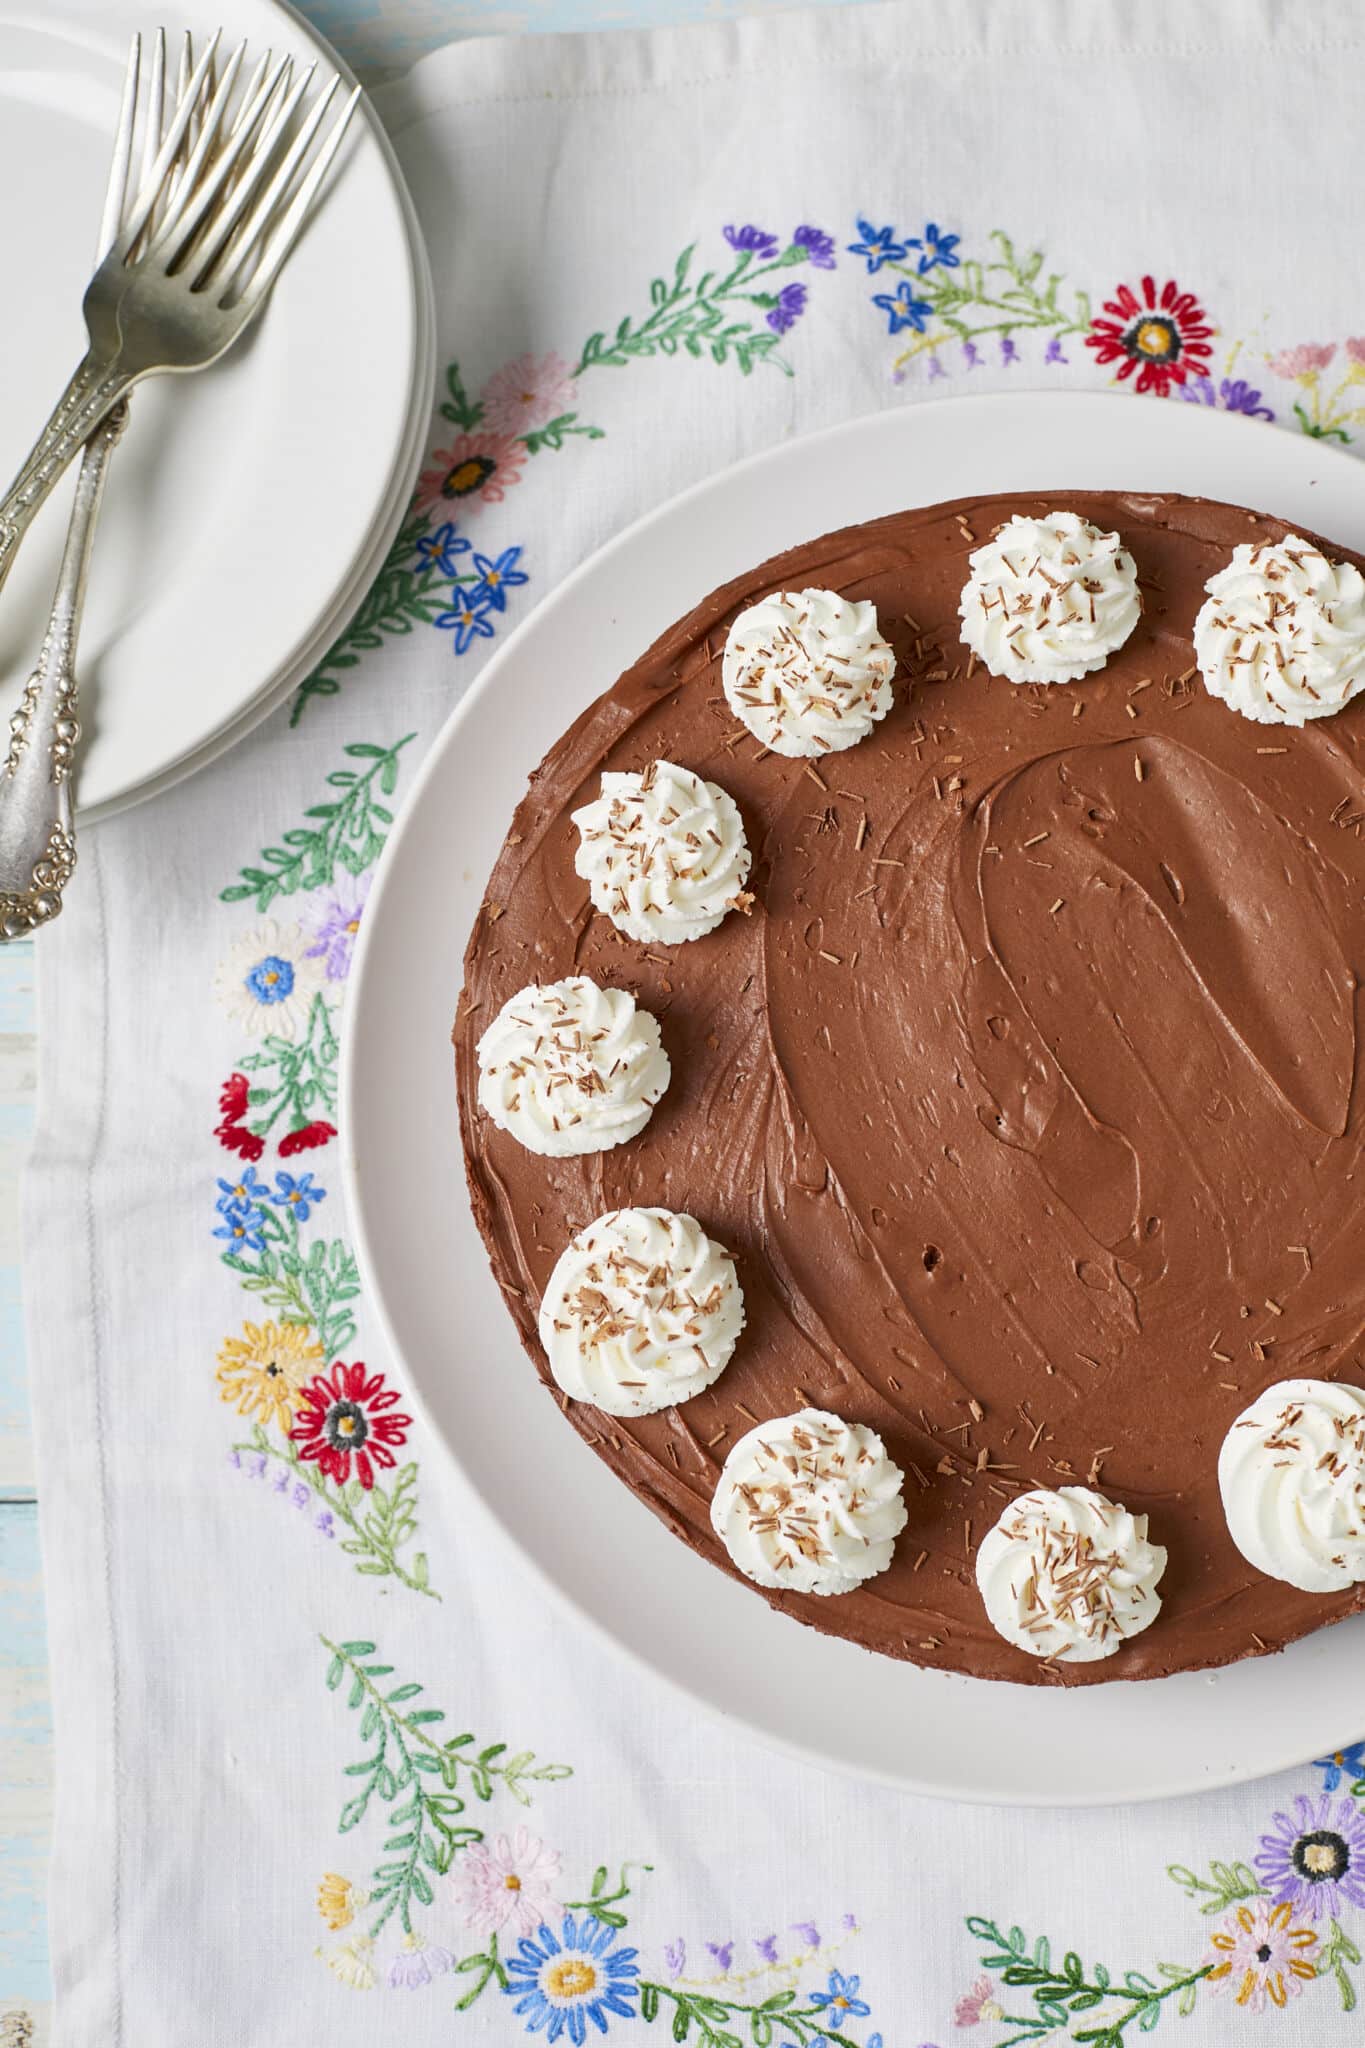 Extremely rich, decadent, and smooth No-Bake Chocolate Cheesecake is served on a white plate topped with whipped cream rosette and chocolate shavings.